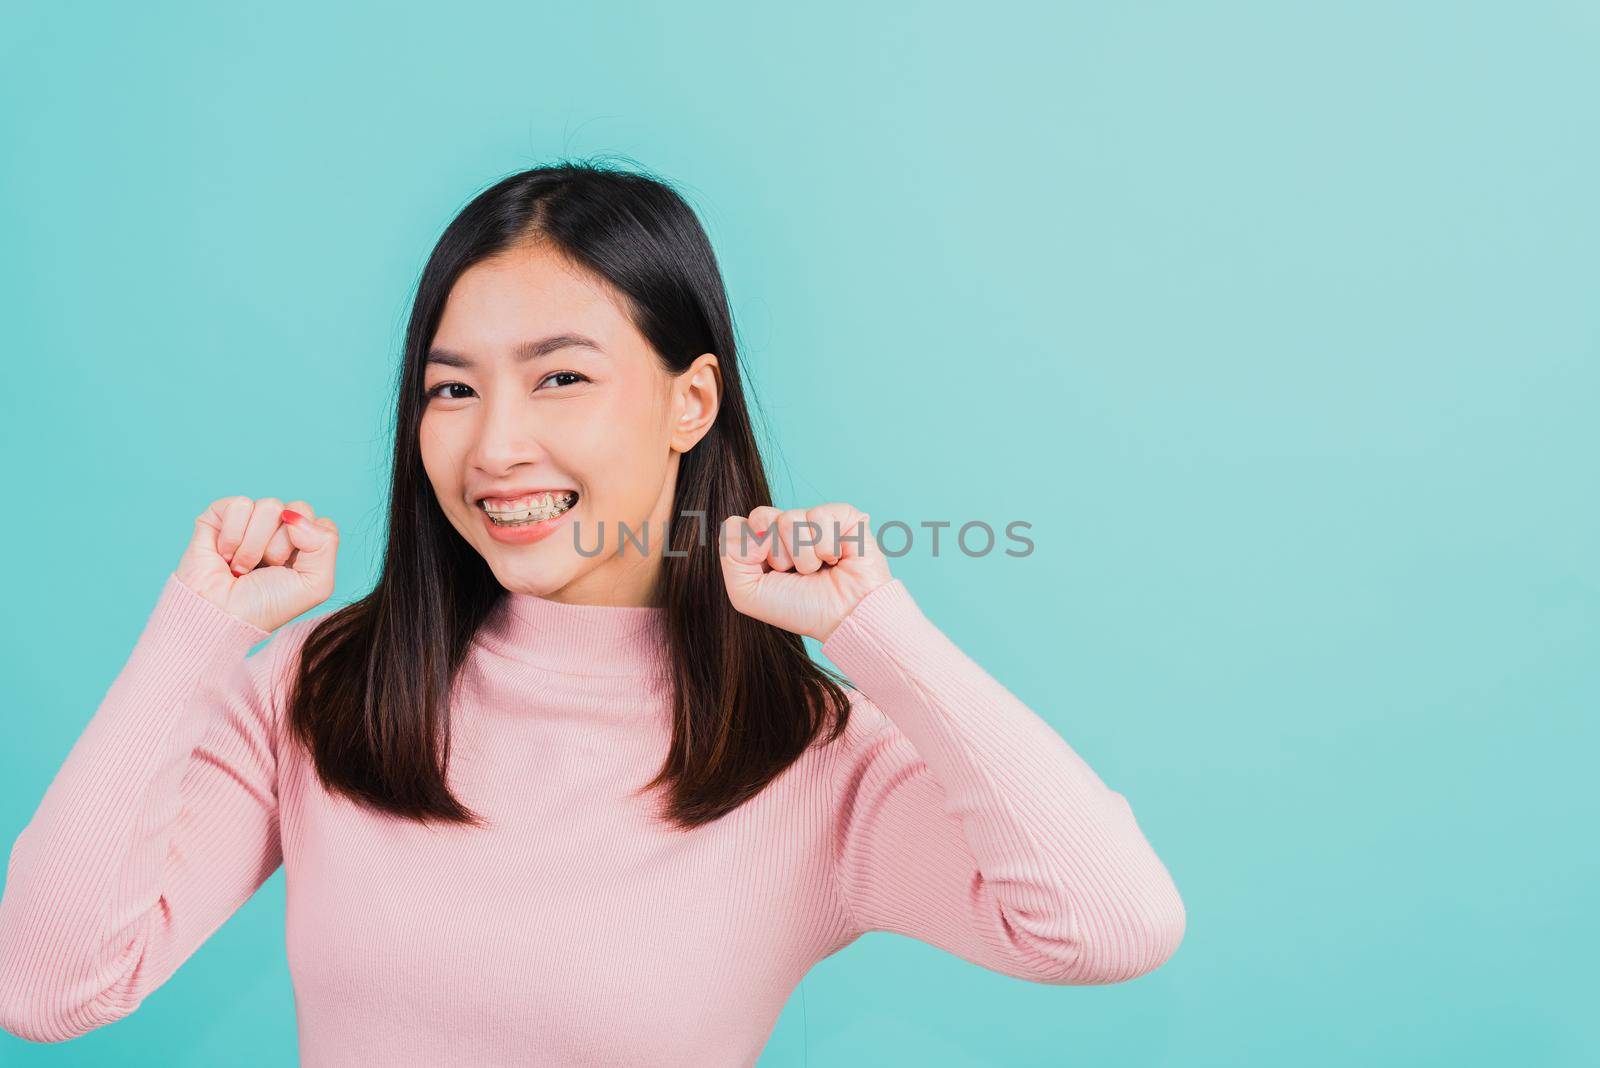 woman smiling wear silicone orthodontic retainers on teeth surprised she is excited screaming and raise hand make gestures wow by Sorapop